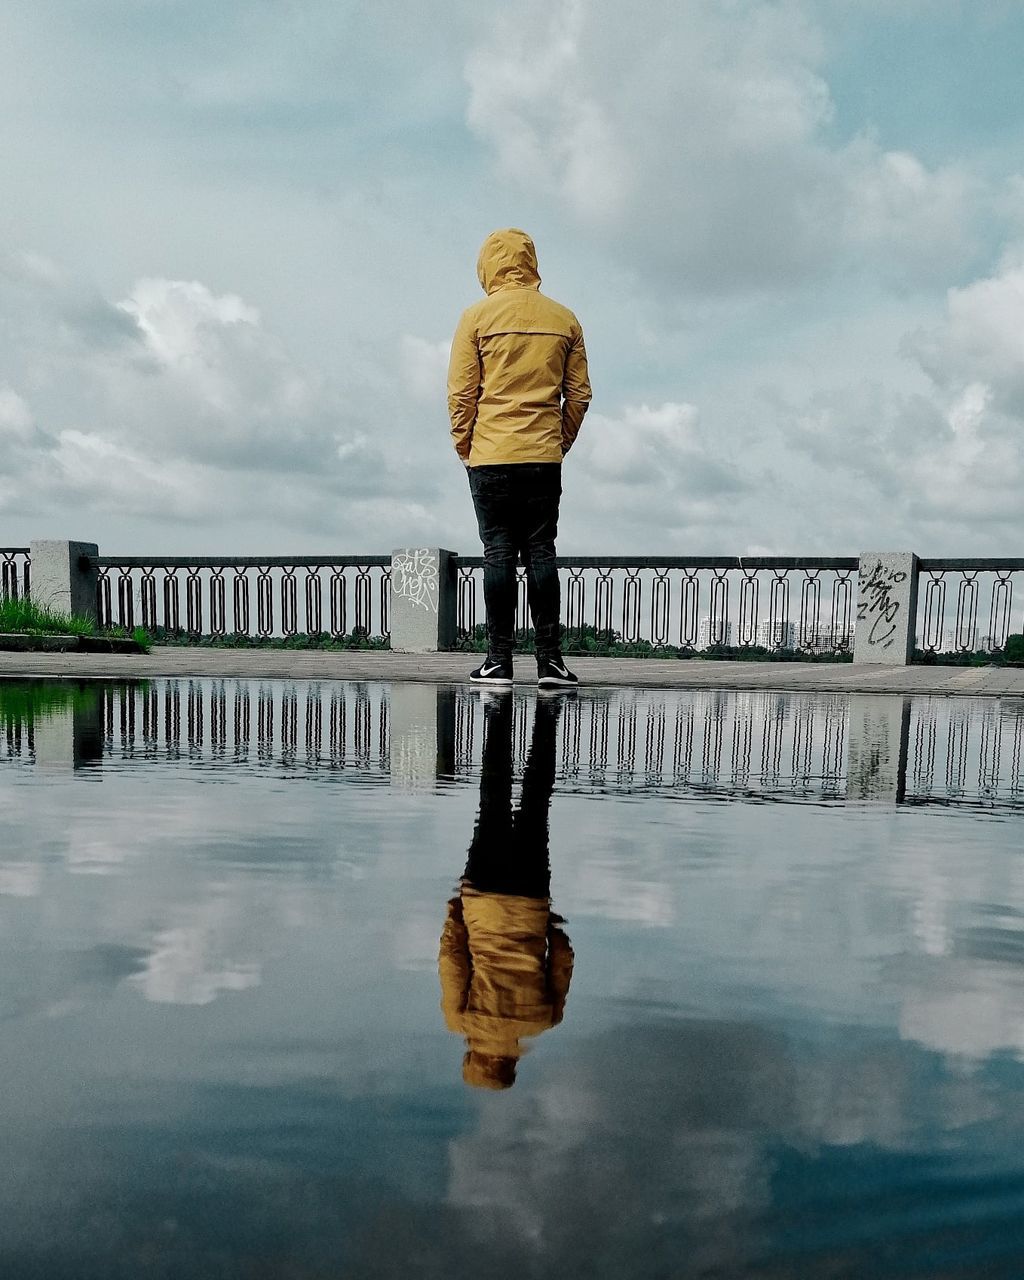 water, cloud, reflection, sky, one person, full length, nature, rear view, adult, architecture, footwear, day, lifestyles, casual clothing, clothing, built structure, bridge, rain, outdoors, winter, standing, railing, leisure activity, person, wet, women, sea, overcast, pier, environment